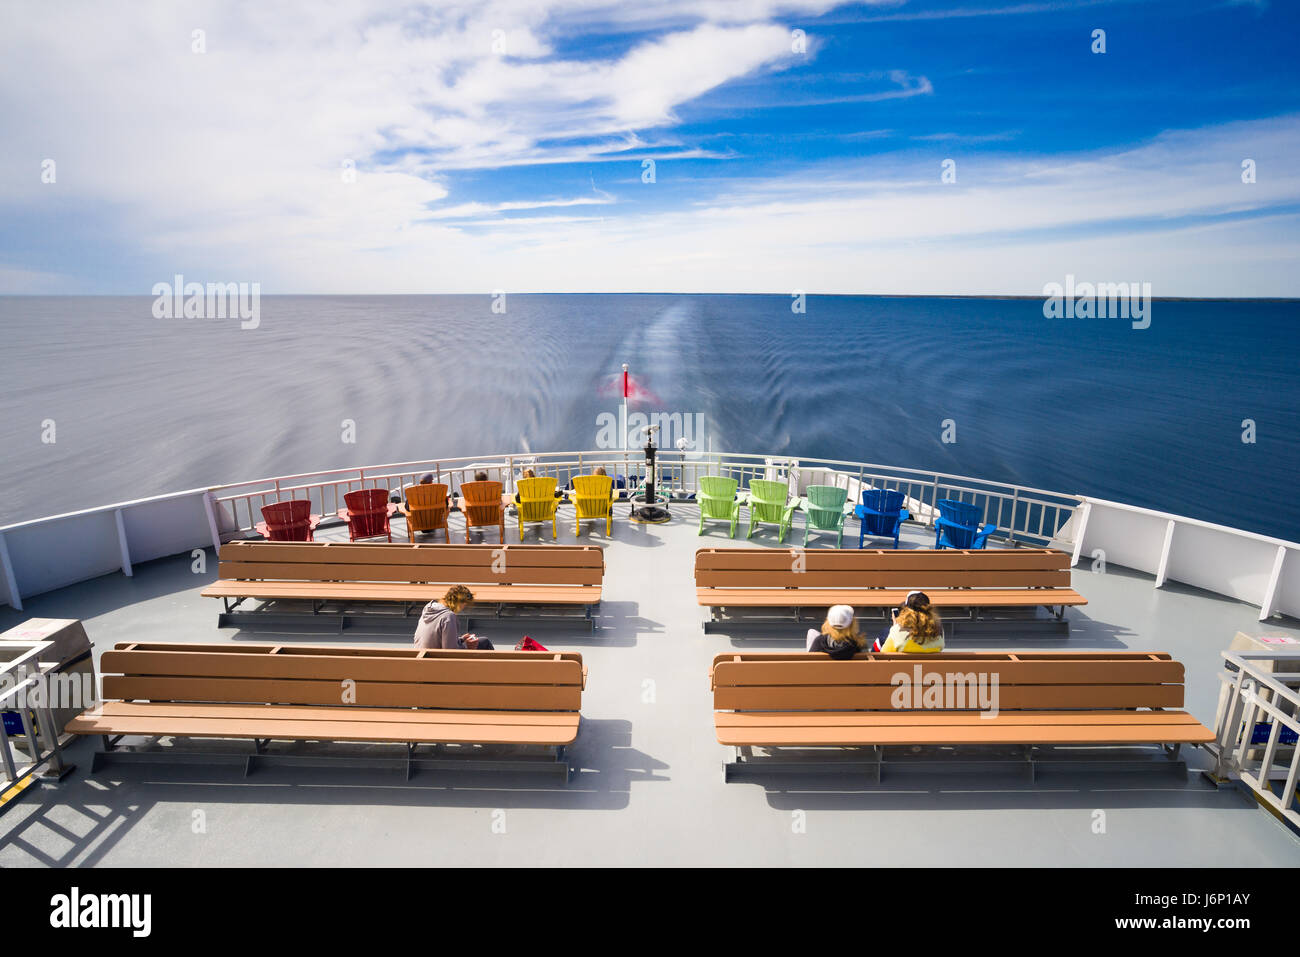 Long Exposure In Daylight From Outside Rear Of Chi-Cheemaun Ferry With Passengers Seated As It Crosses Lake Huron From South Baymouth To Tobermory Stock Photo